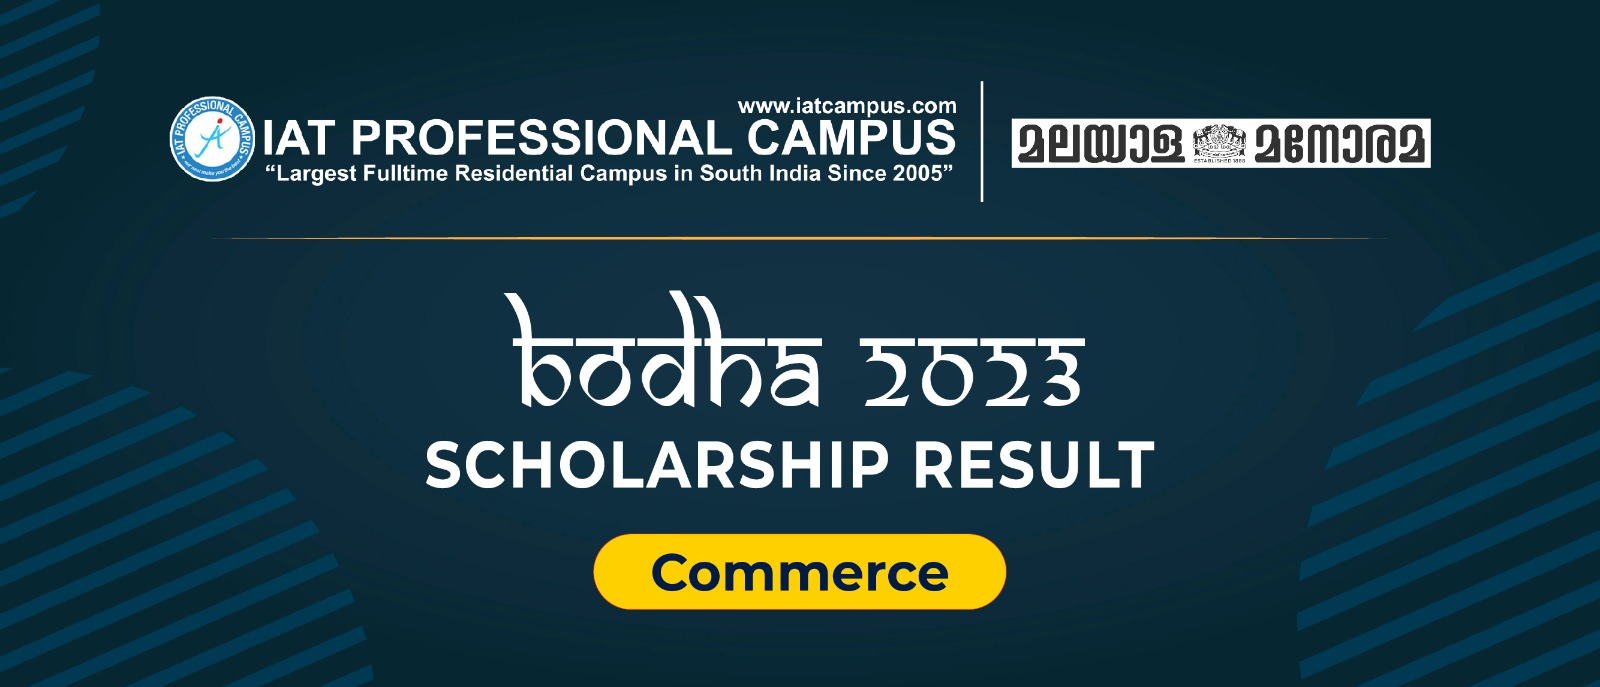 You are currently viewing Bodha Scholarship Commerce Result 2023